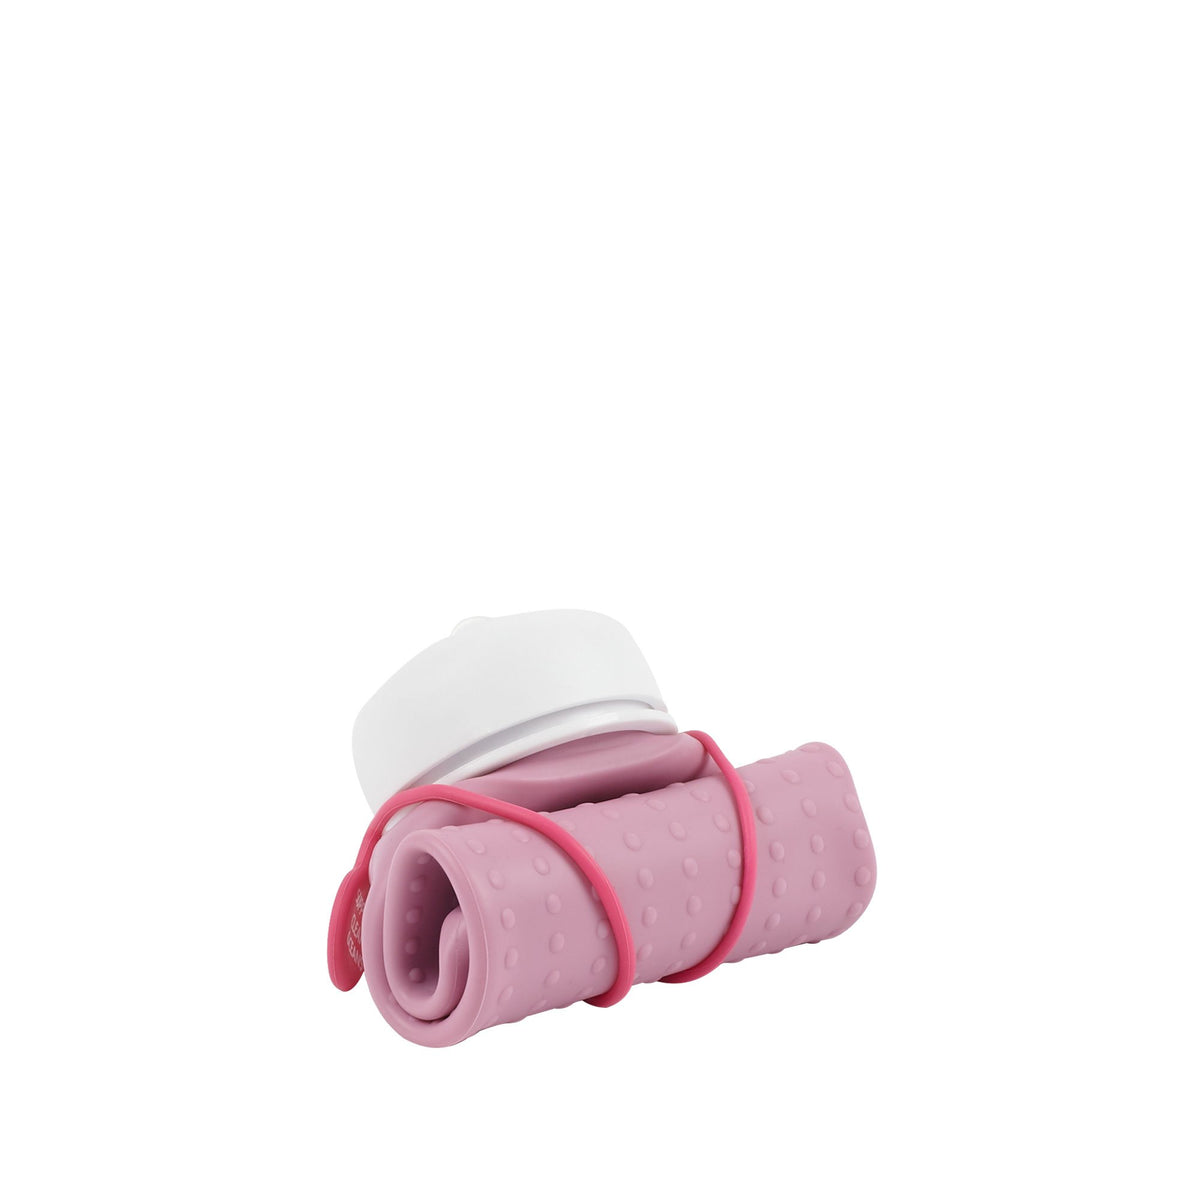 Rolla Bottle Pink Lilac, White Lid + Pink Strap